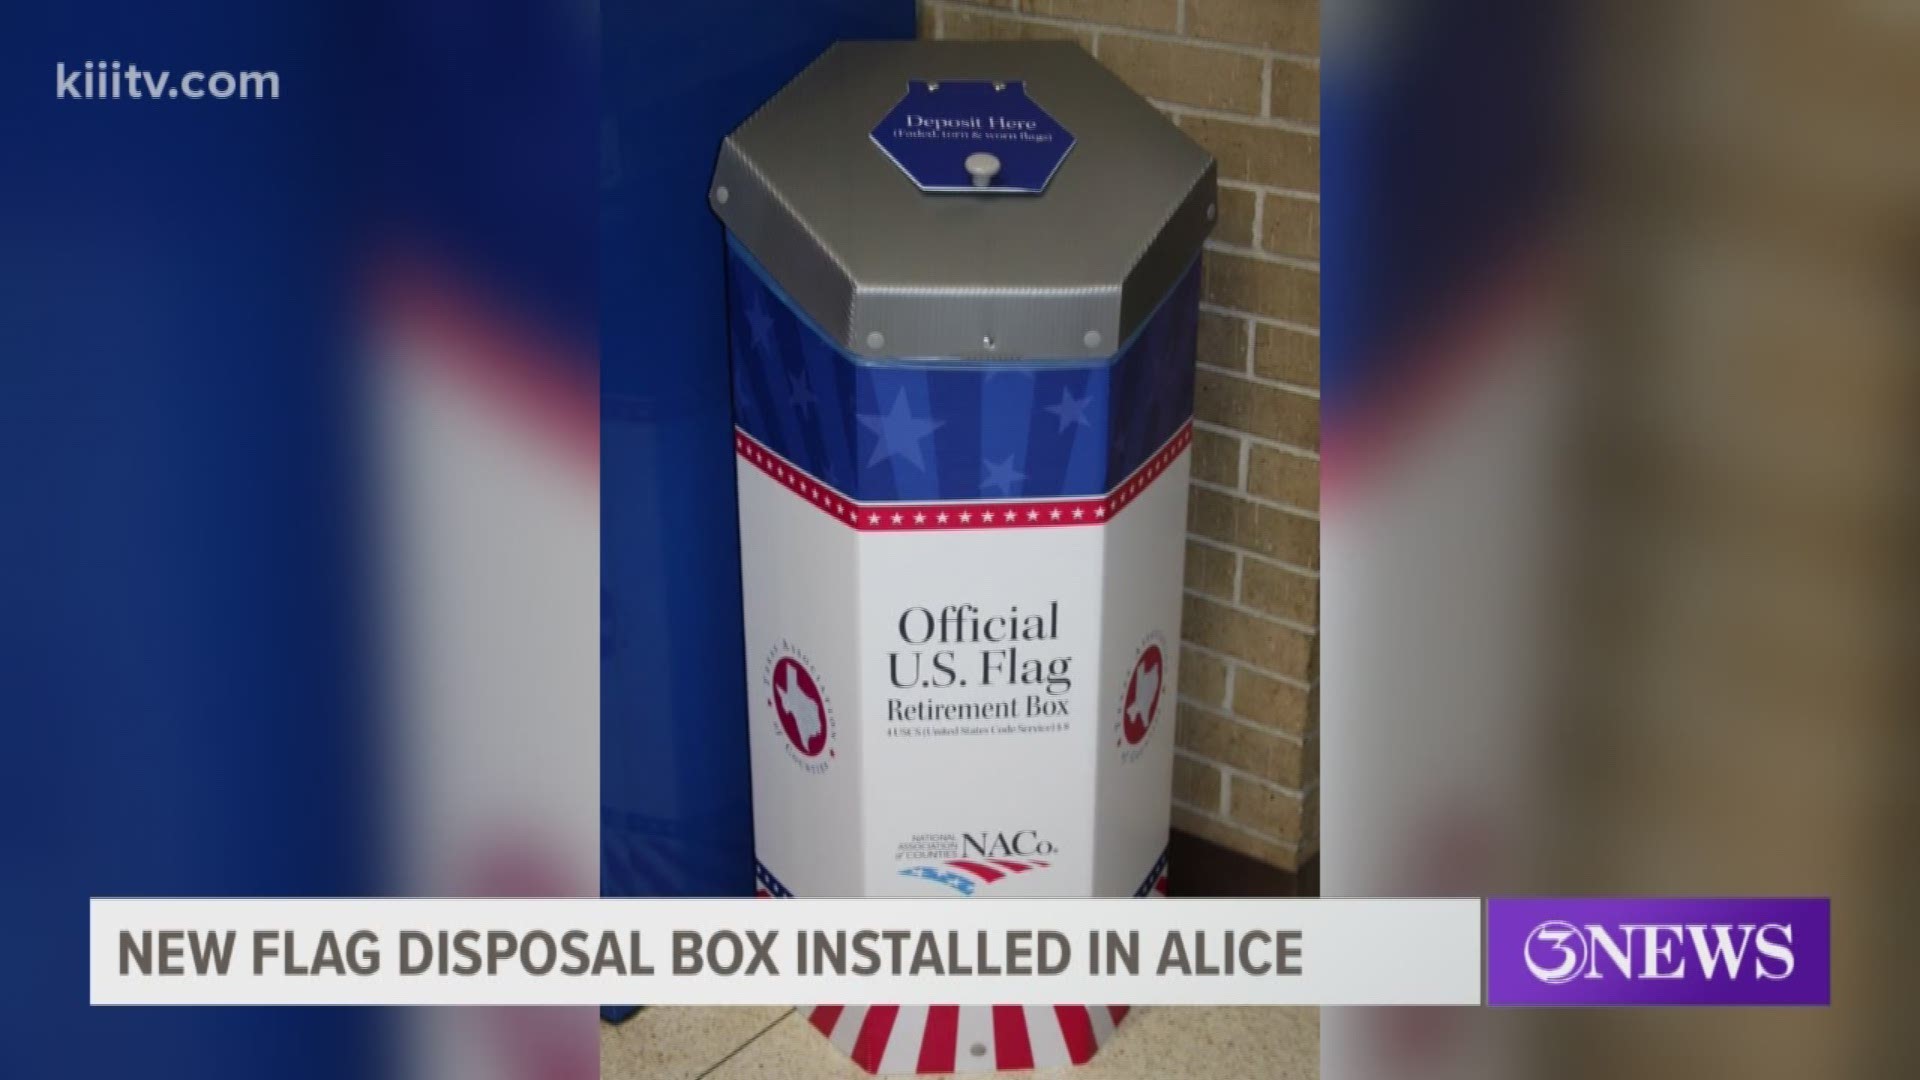 There is now a way for people to properly dispose of a U.S. flag in Alice, Texas.